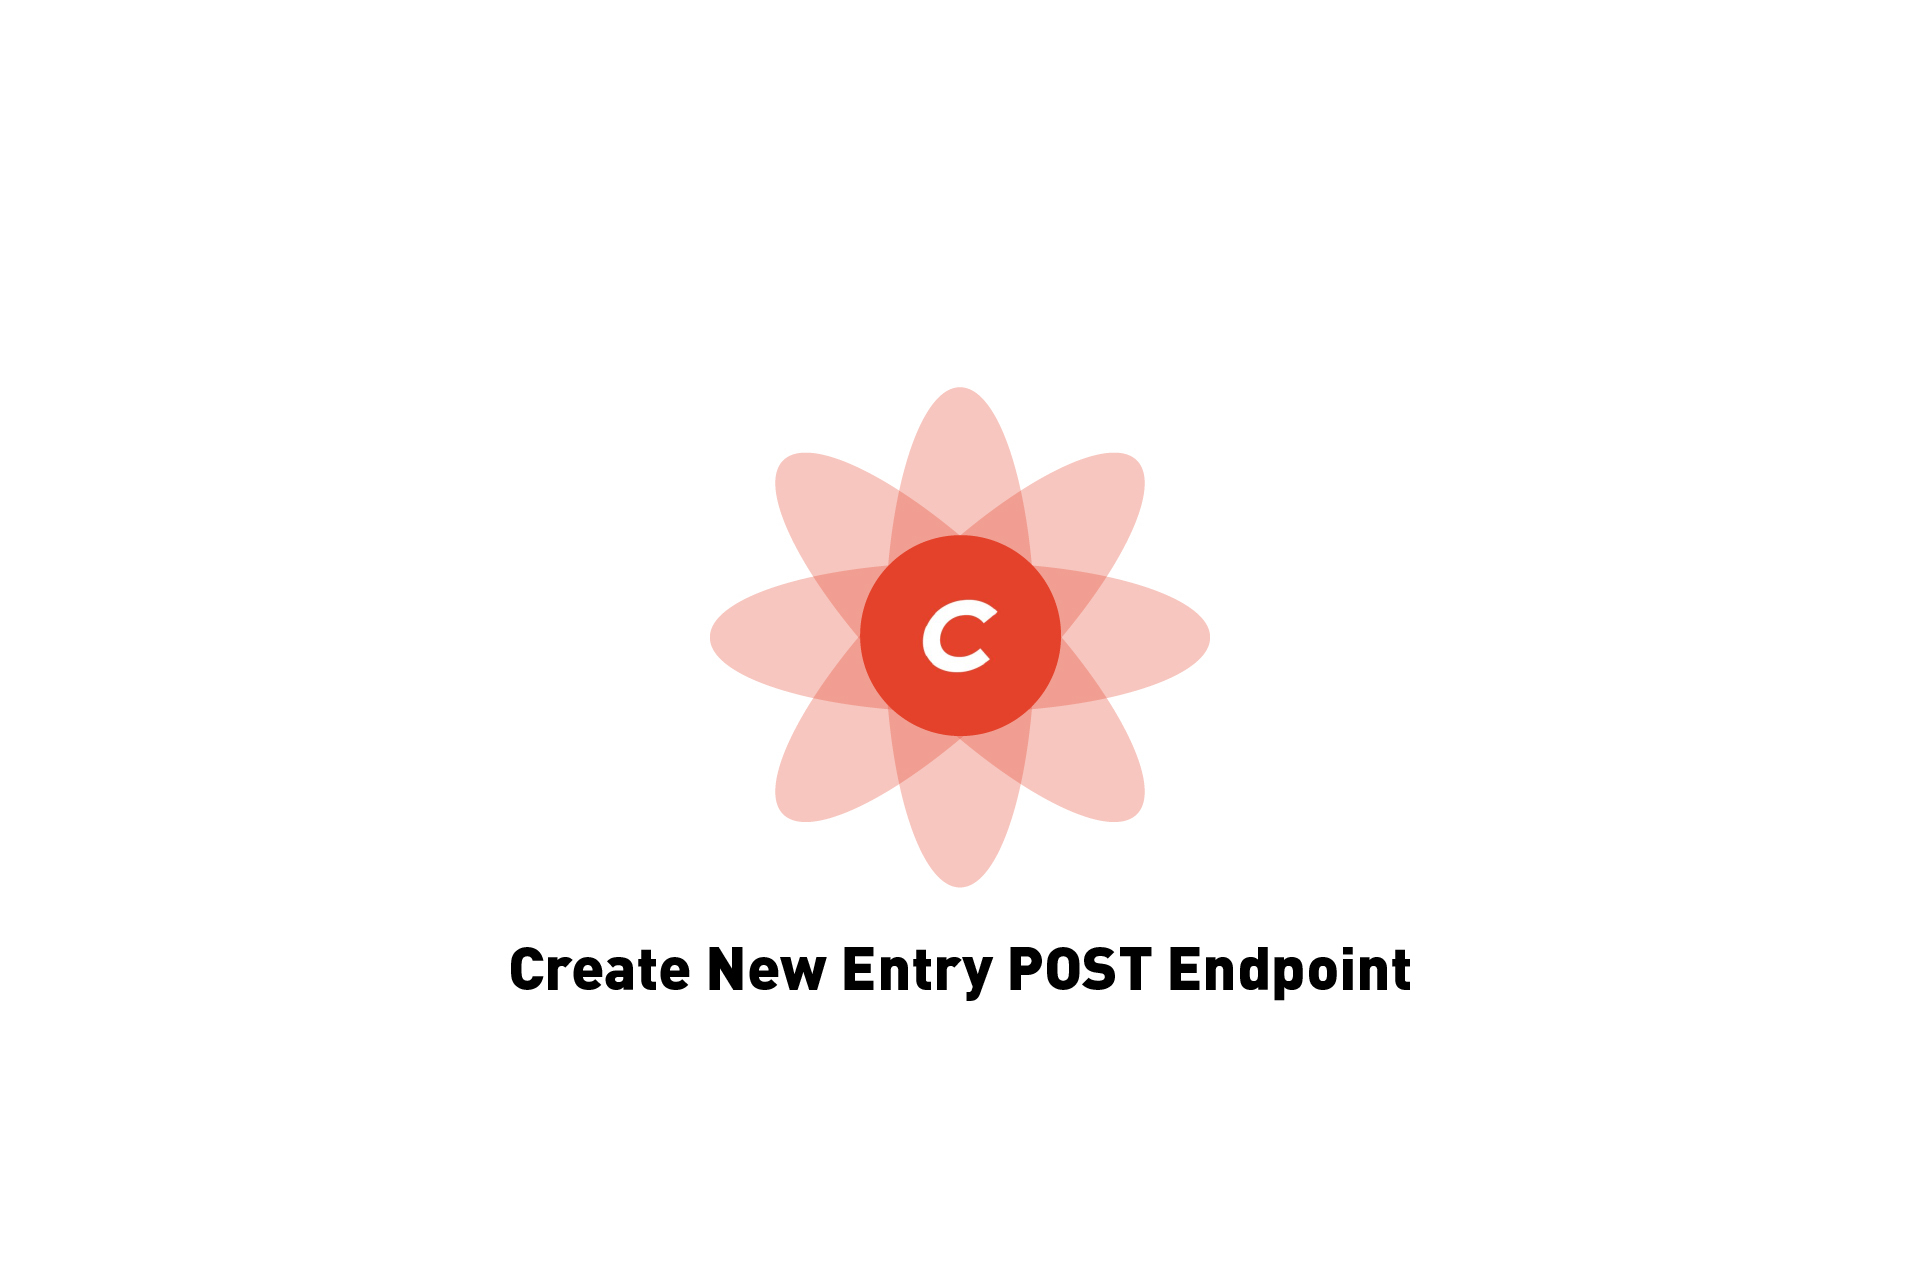 A flower that represents Craft CMS with the text "Create New Entry POST Endpoint"